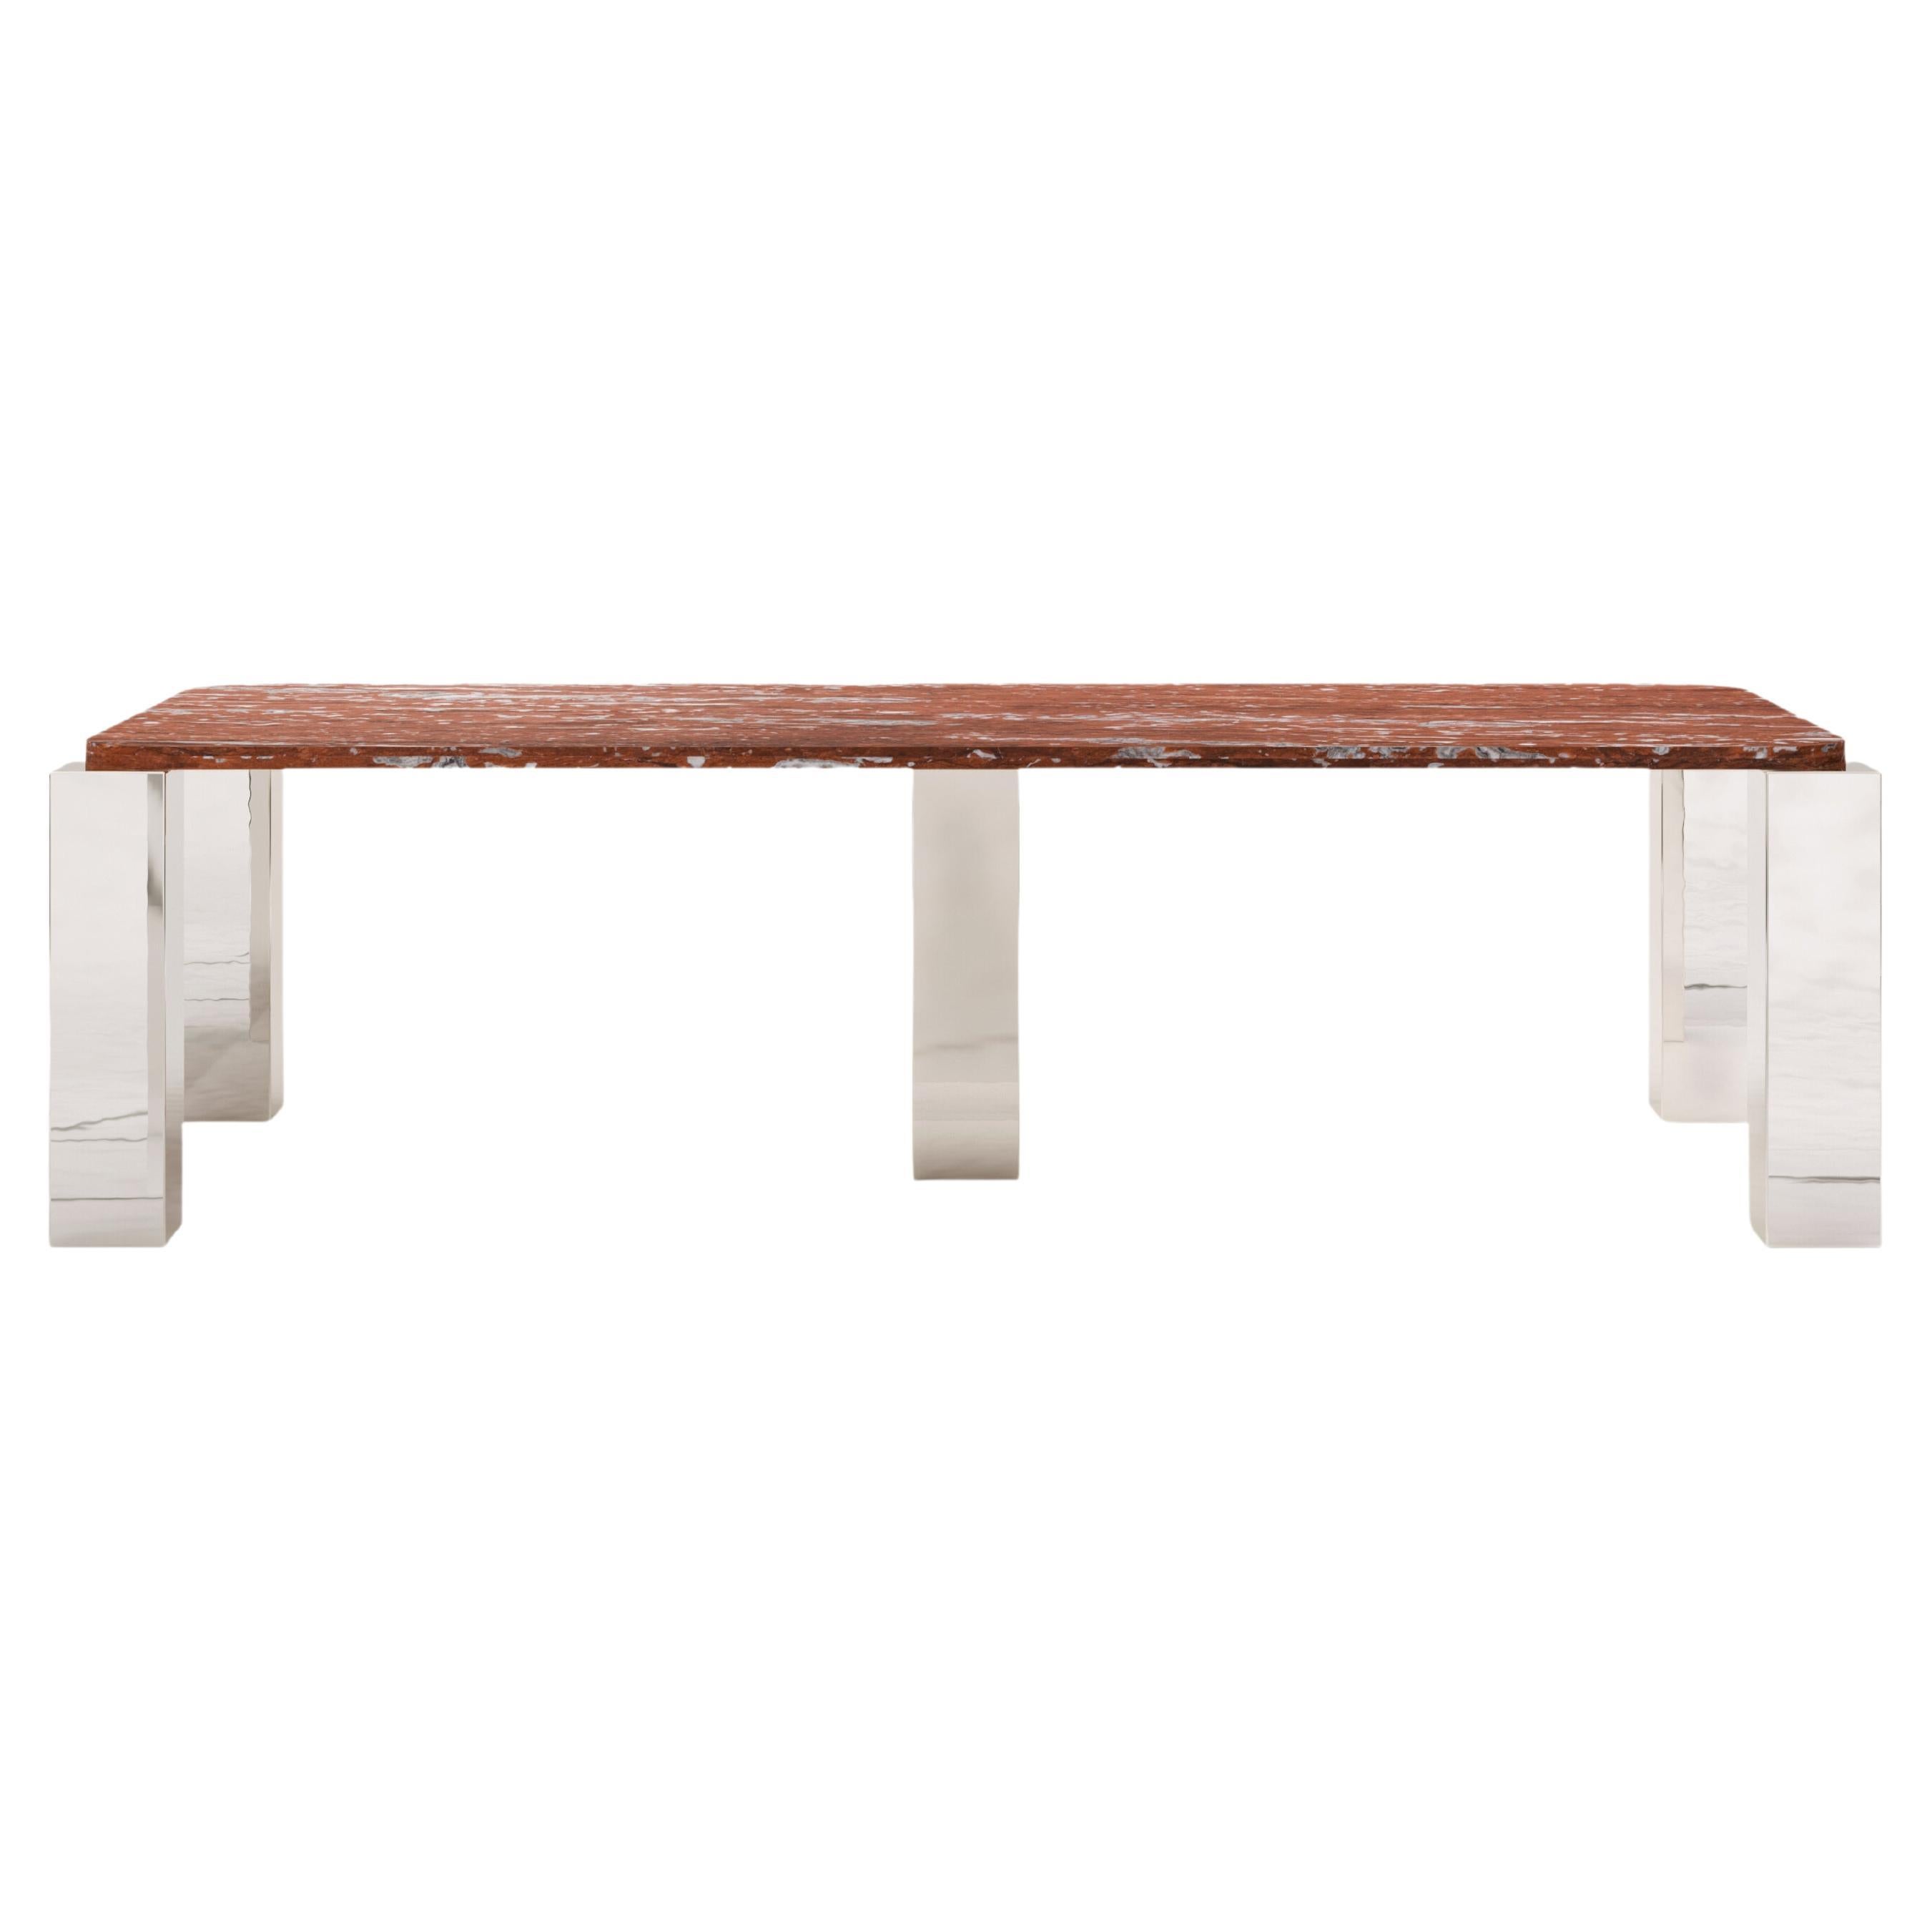 FORM(LA) Cubo Rectangle Dining Table 98”L x 44”W x 30”H Francia Marble & Chrome For Sale